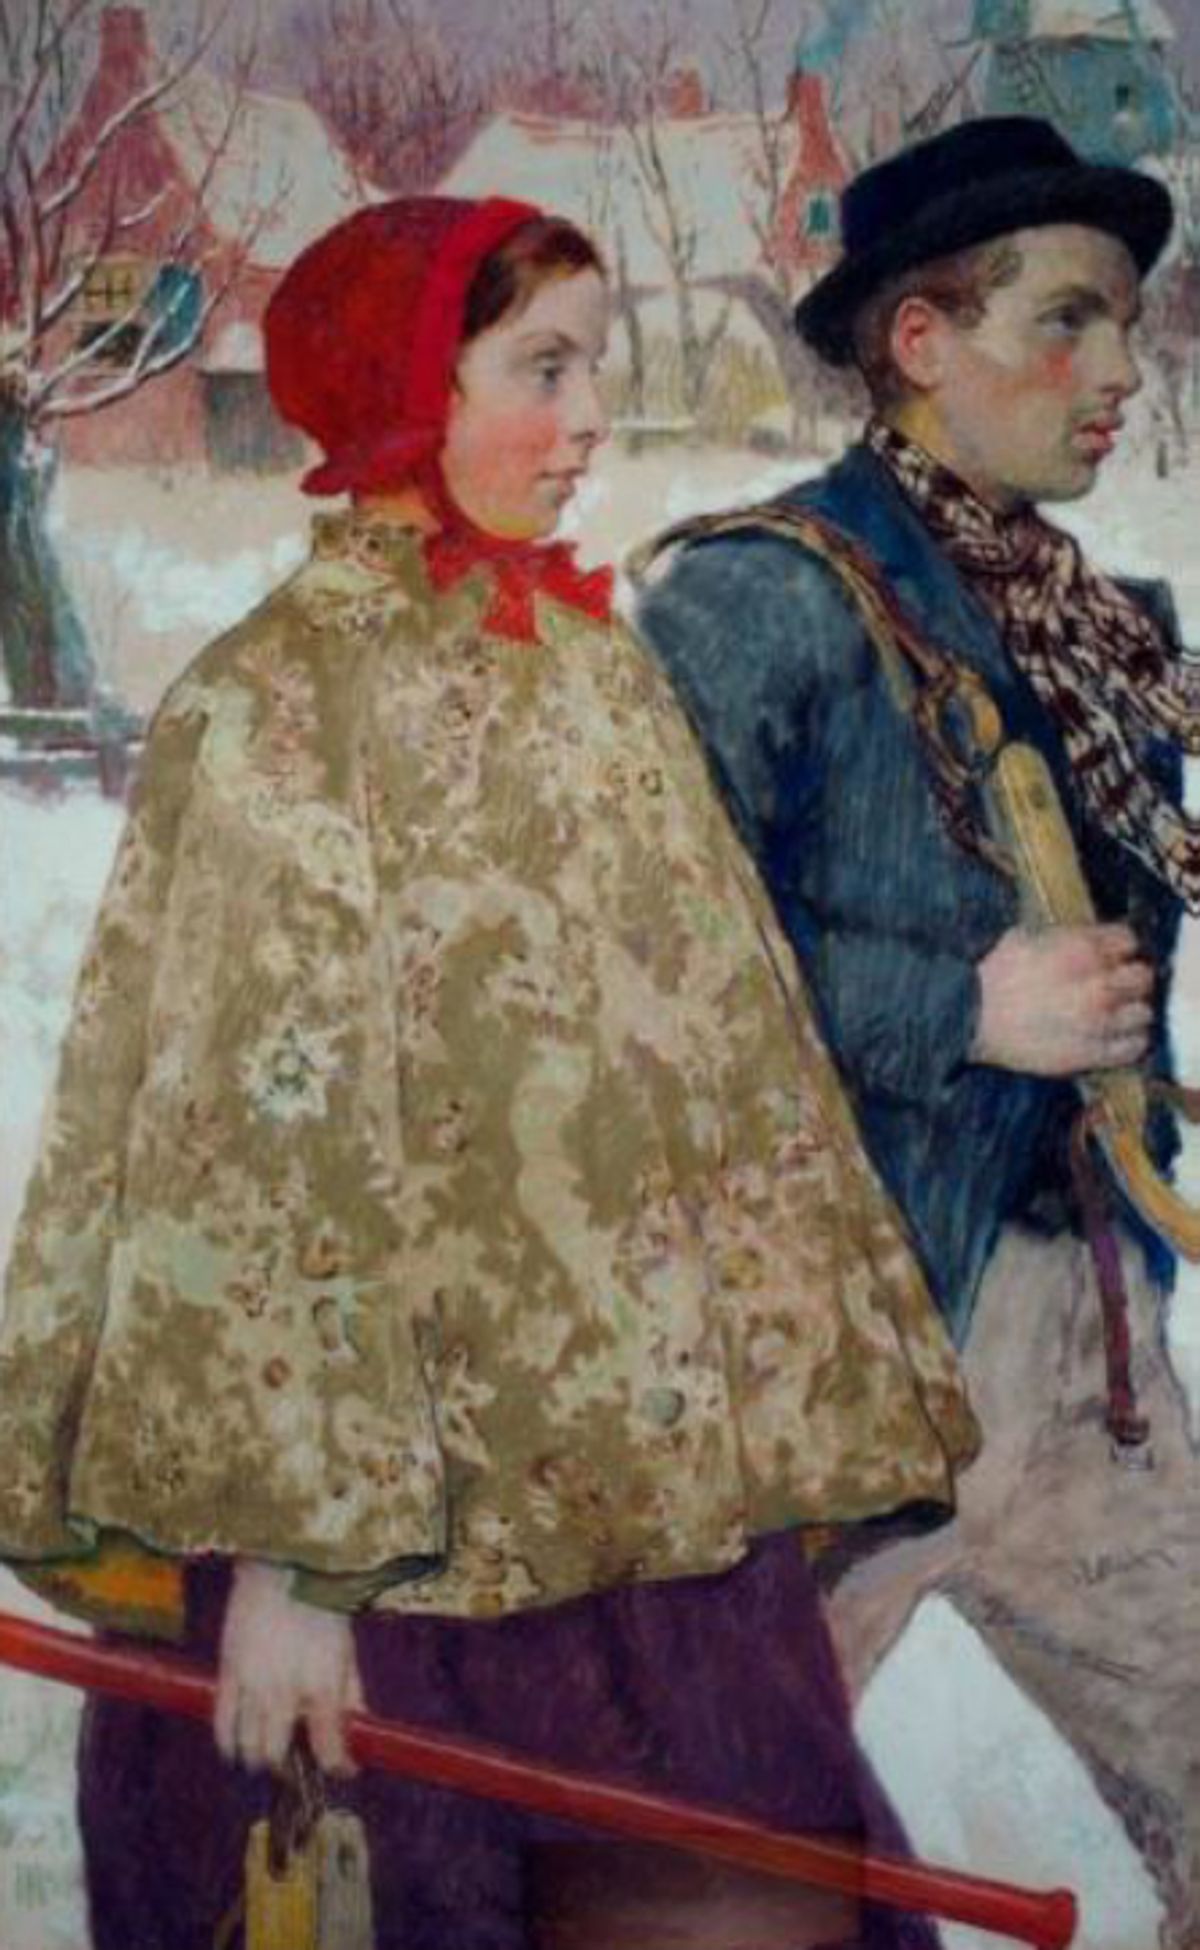 Gari Melchers's painting of ice skaters was in the collection of Rudolf Mosse © Arkell Museum, Canajoharie/New York, Foto: Arkell Museum, Canajoharie/New York